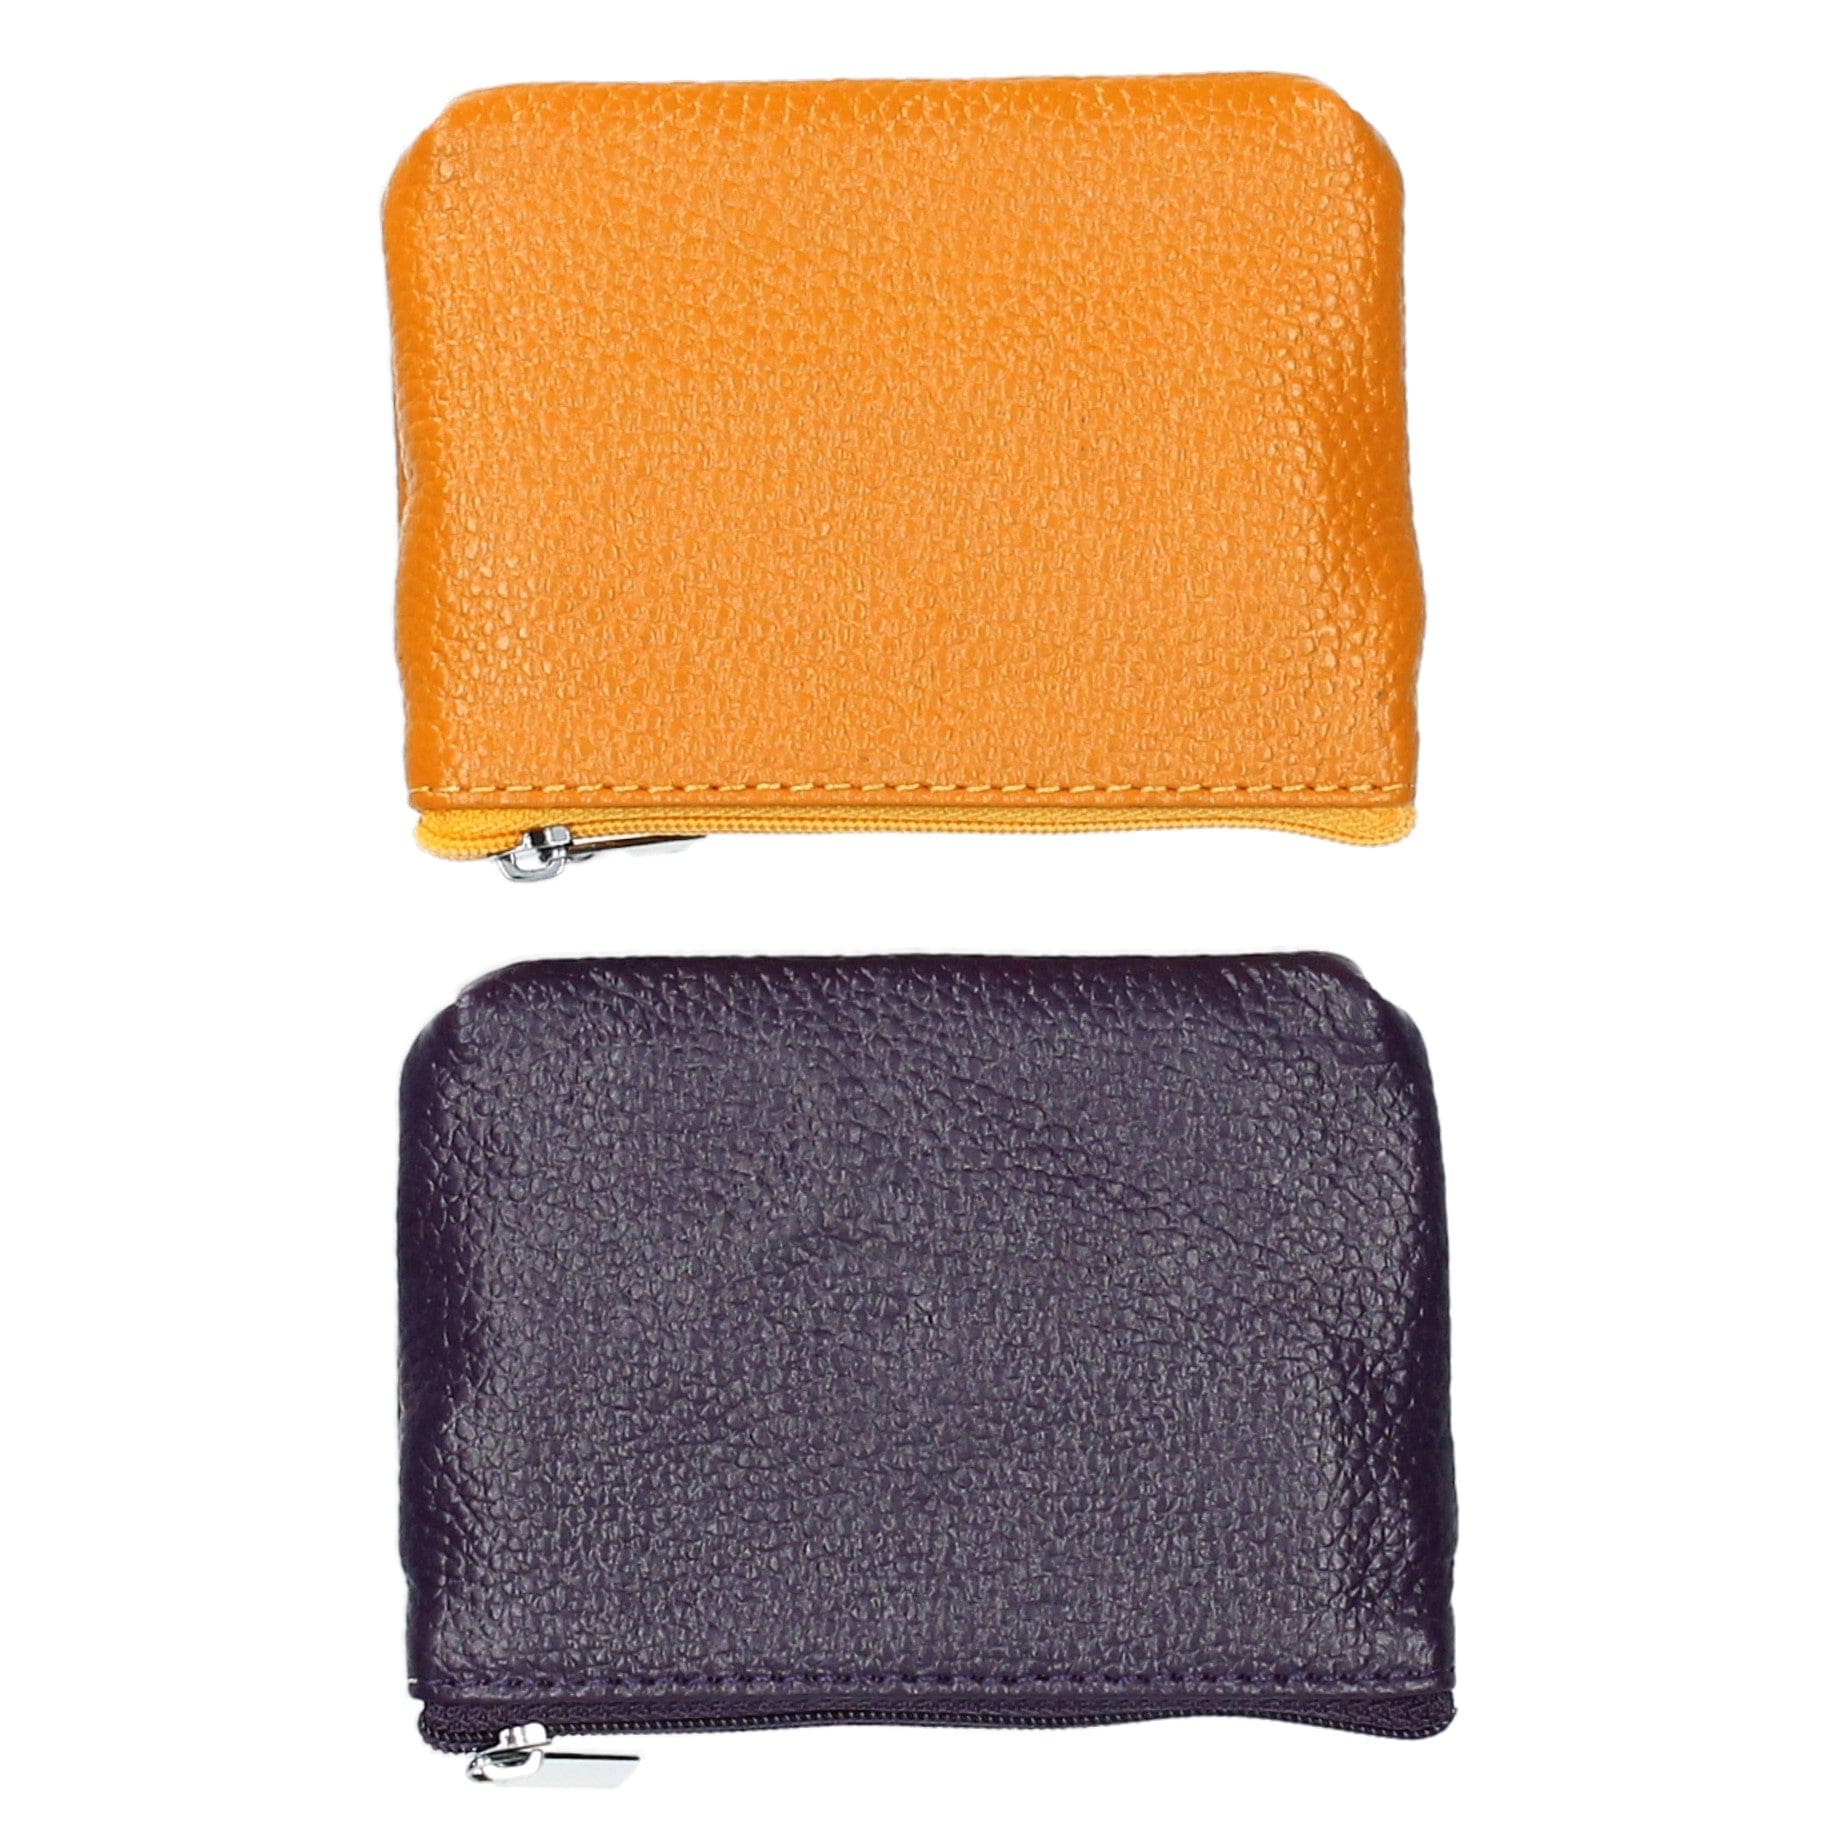 Arlette purse - Small leather goods